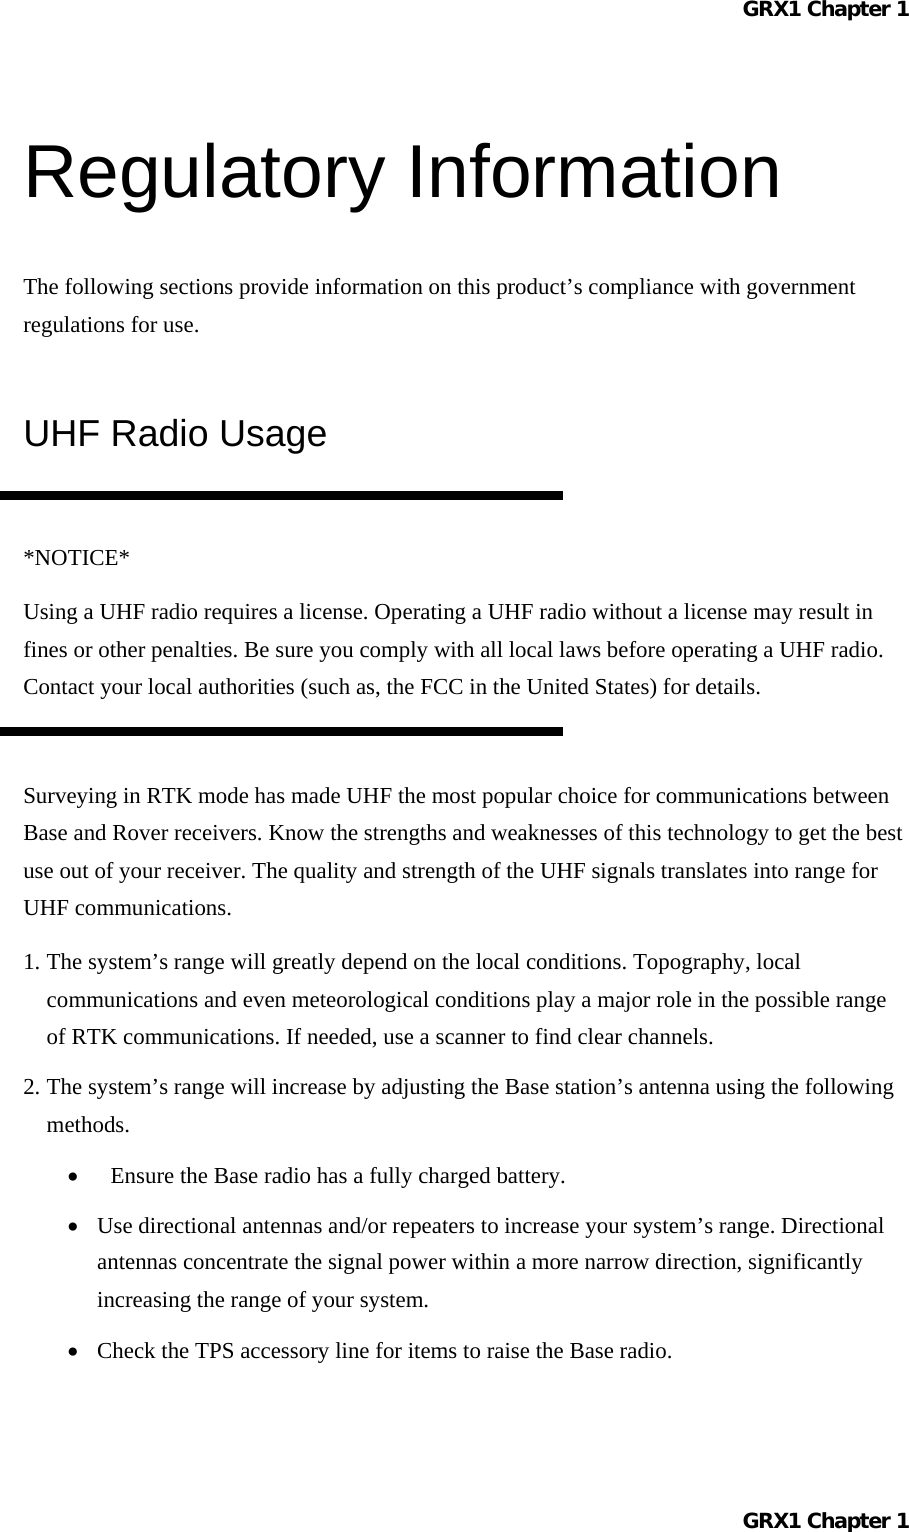 GRX1 Chapter 1  Regulatory Information The following sections provide information on this product’s compliance with government regulations for use. UHF Radio Usage  *NOTICE* Using a UHF radio requires a license. Operating a UHF radio without a license may result in fines or other penalties. Be sure you comply with all local laws before operating a UHF radio. Contact your local authorities (such as, the FCC in the United States) for details.  Surveying in RTK mode has made UHF the most popular choice for communications between Base and Rover receivers. Know the strengths and weaknesses of this technology to get the best use out of your receiver. The quality and strength of the UHF signals translates into range for UHF communications. 1. The system’s range will greatly depend on the local conditions. Topography, local communications and even meteorological conditions play a major role in the possible range of RTK communications. If needed, use a scanner to find clear channels. 2. The system’s range will increase by adjusting the Base station’s antenna using the following methods. •  Ensure the Base radio has a fully charged battery. •  Use directional antennas and/or repeaters to increase your system’s range. Directional antennas concentrate the signal power within a more narrow direction, significantly increasing the range of your system. •  Check the TPS accessory line for items to raise the Base radio. GRX1 Chapter 1  